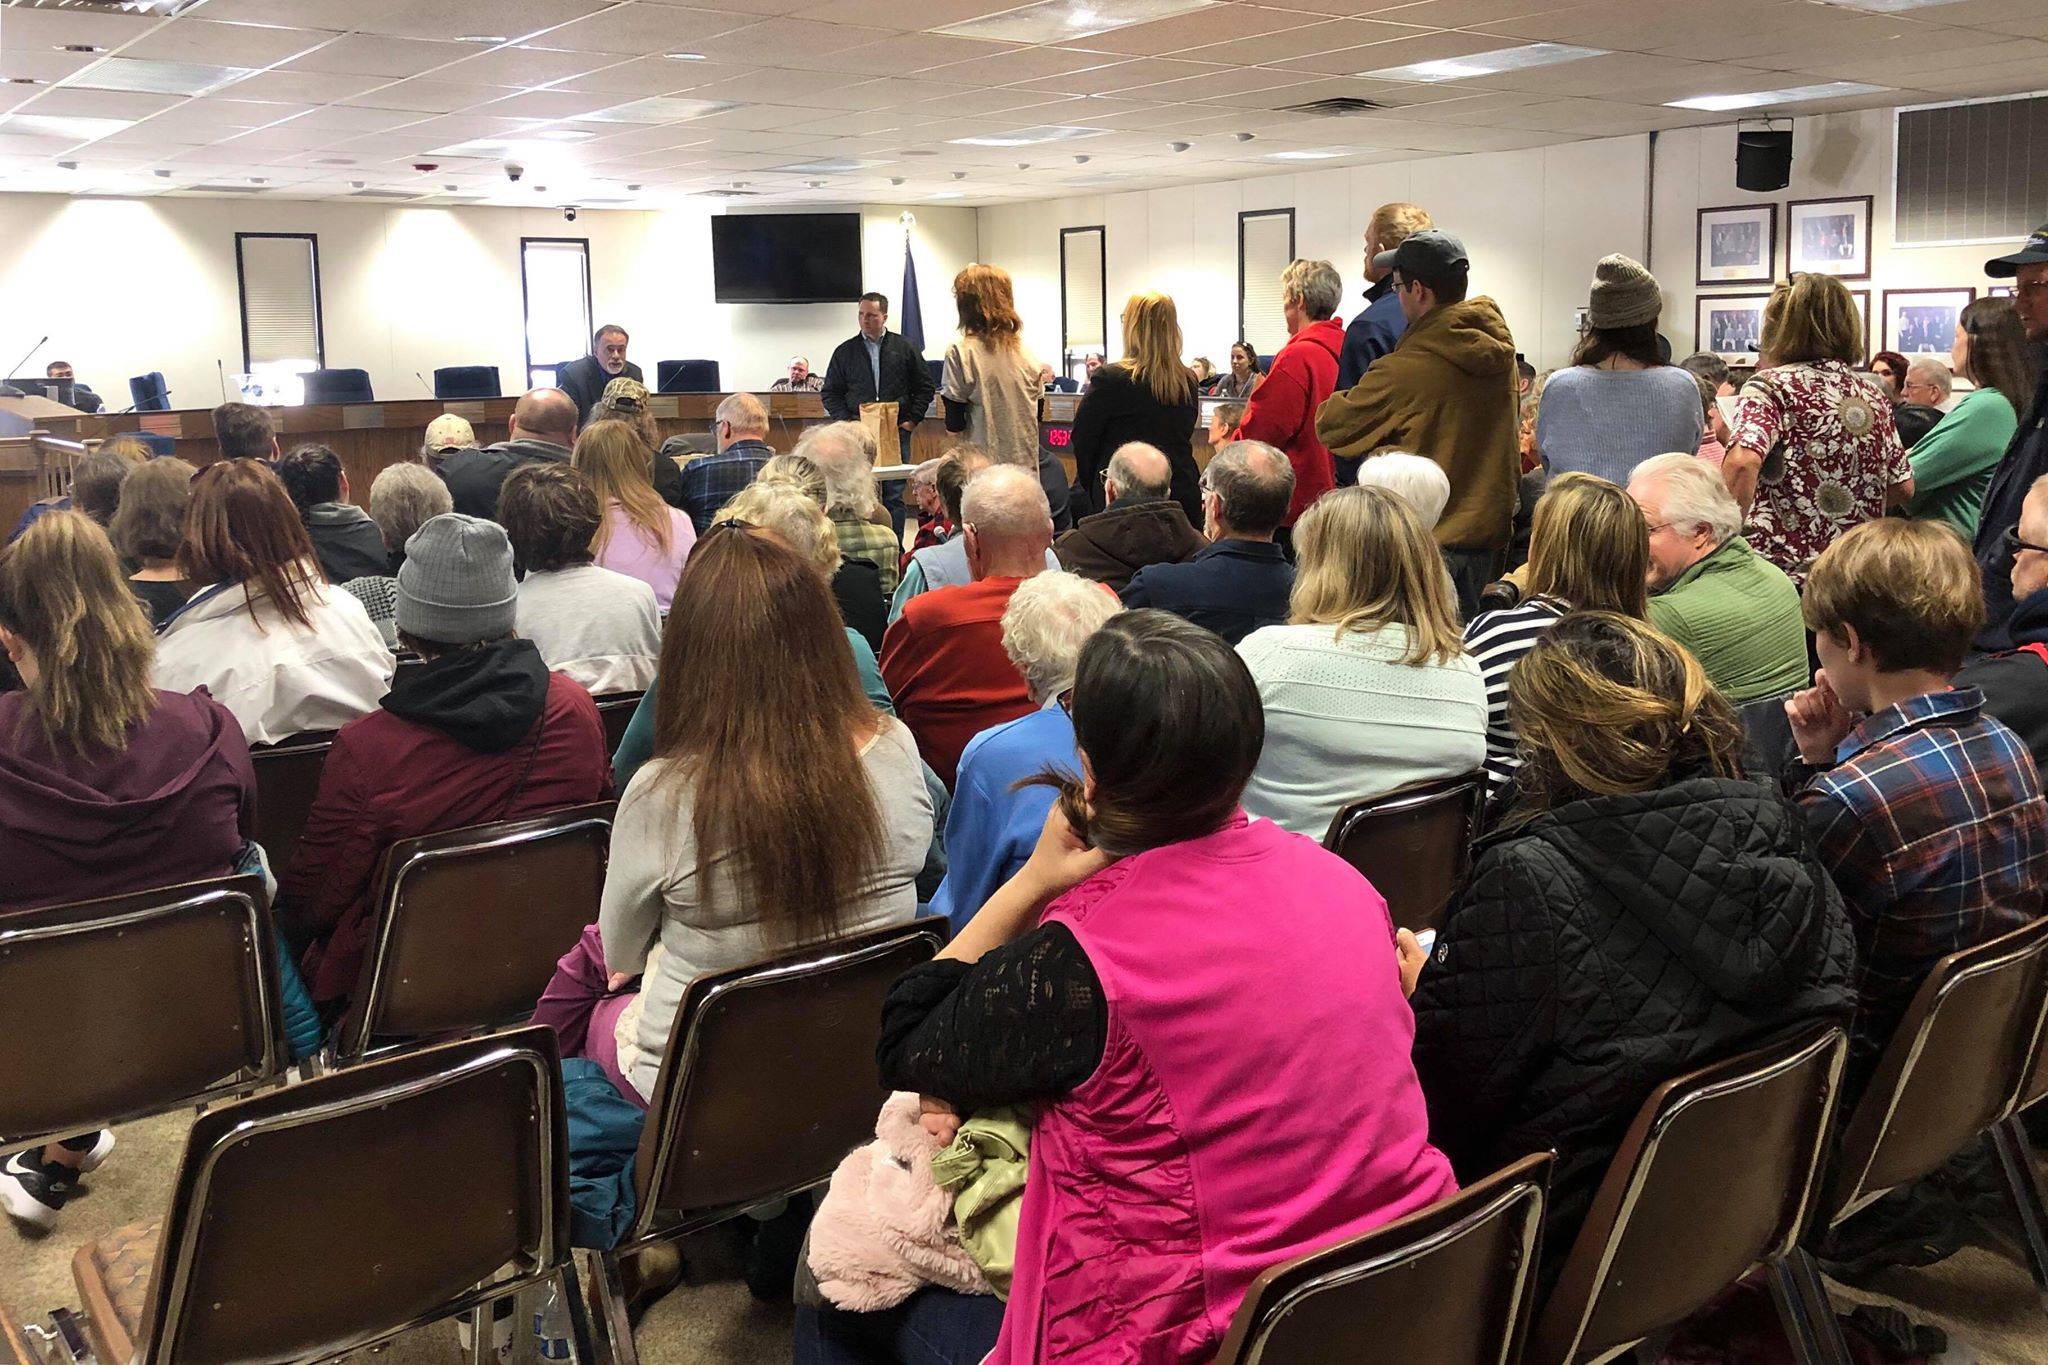 Residents pack into the Kenai Peninsula Borough Betty J. Glick Assembly Chambers for a chance to hear and speak with R-Sen. Peter Micciche (Kenai/Soldotna) and R-Rep. Ben Carpenter (Nikiski) at a town hall meeting, Saturday, Feb. 23, 2019, in Soldotna, Alaska. (Photo by Victoria Petersen/Peninsula Clarion)